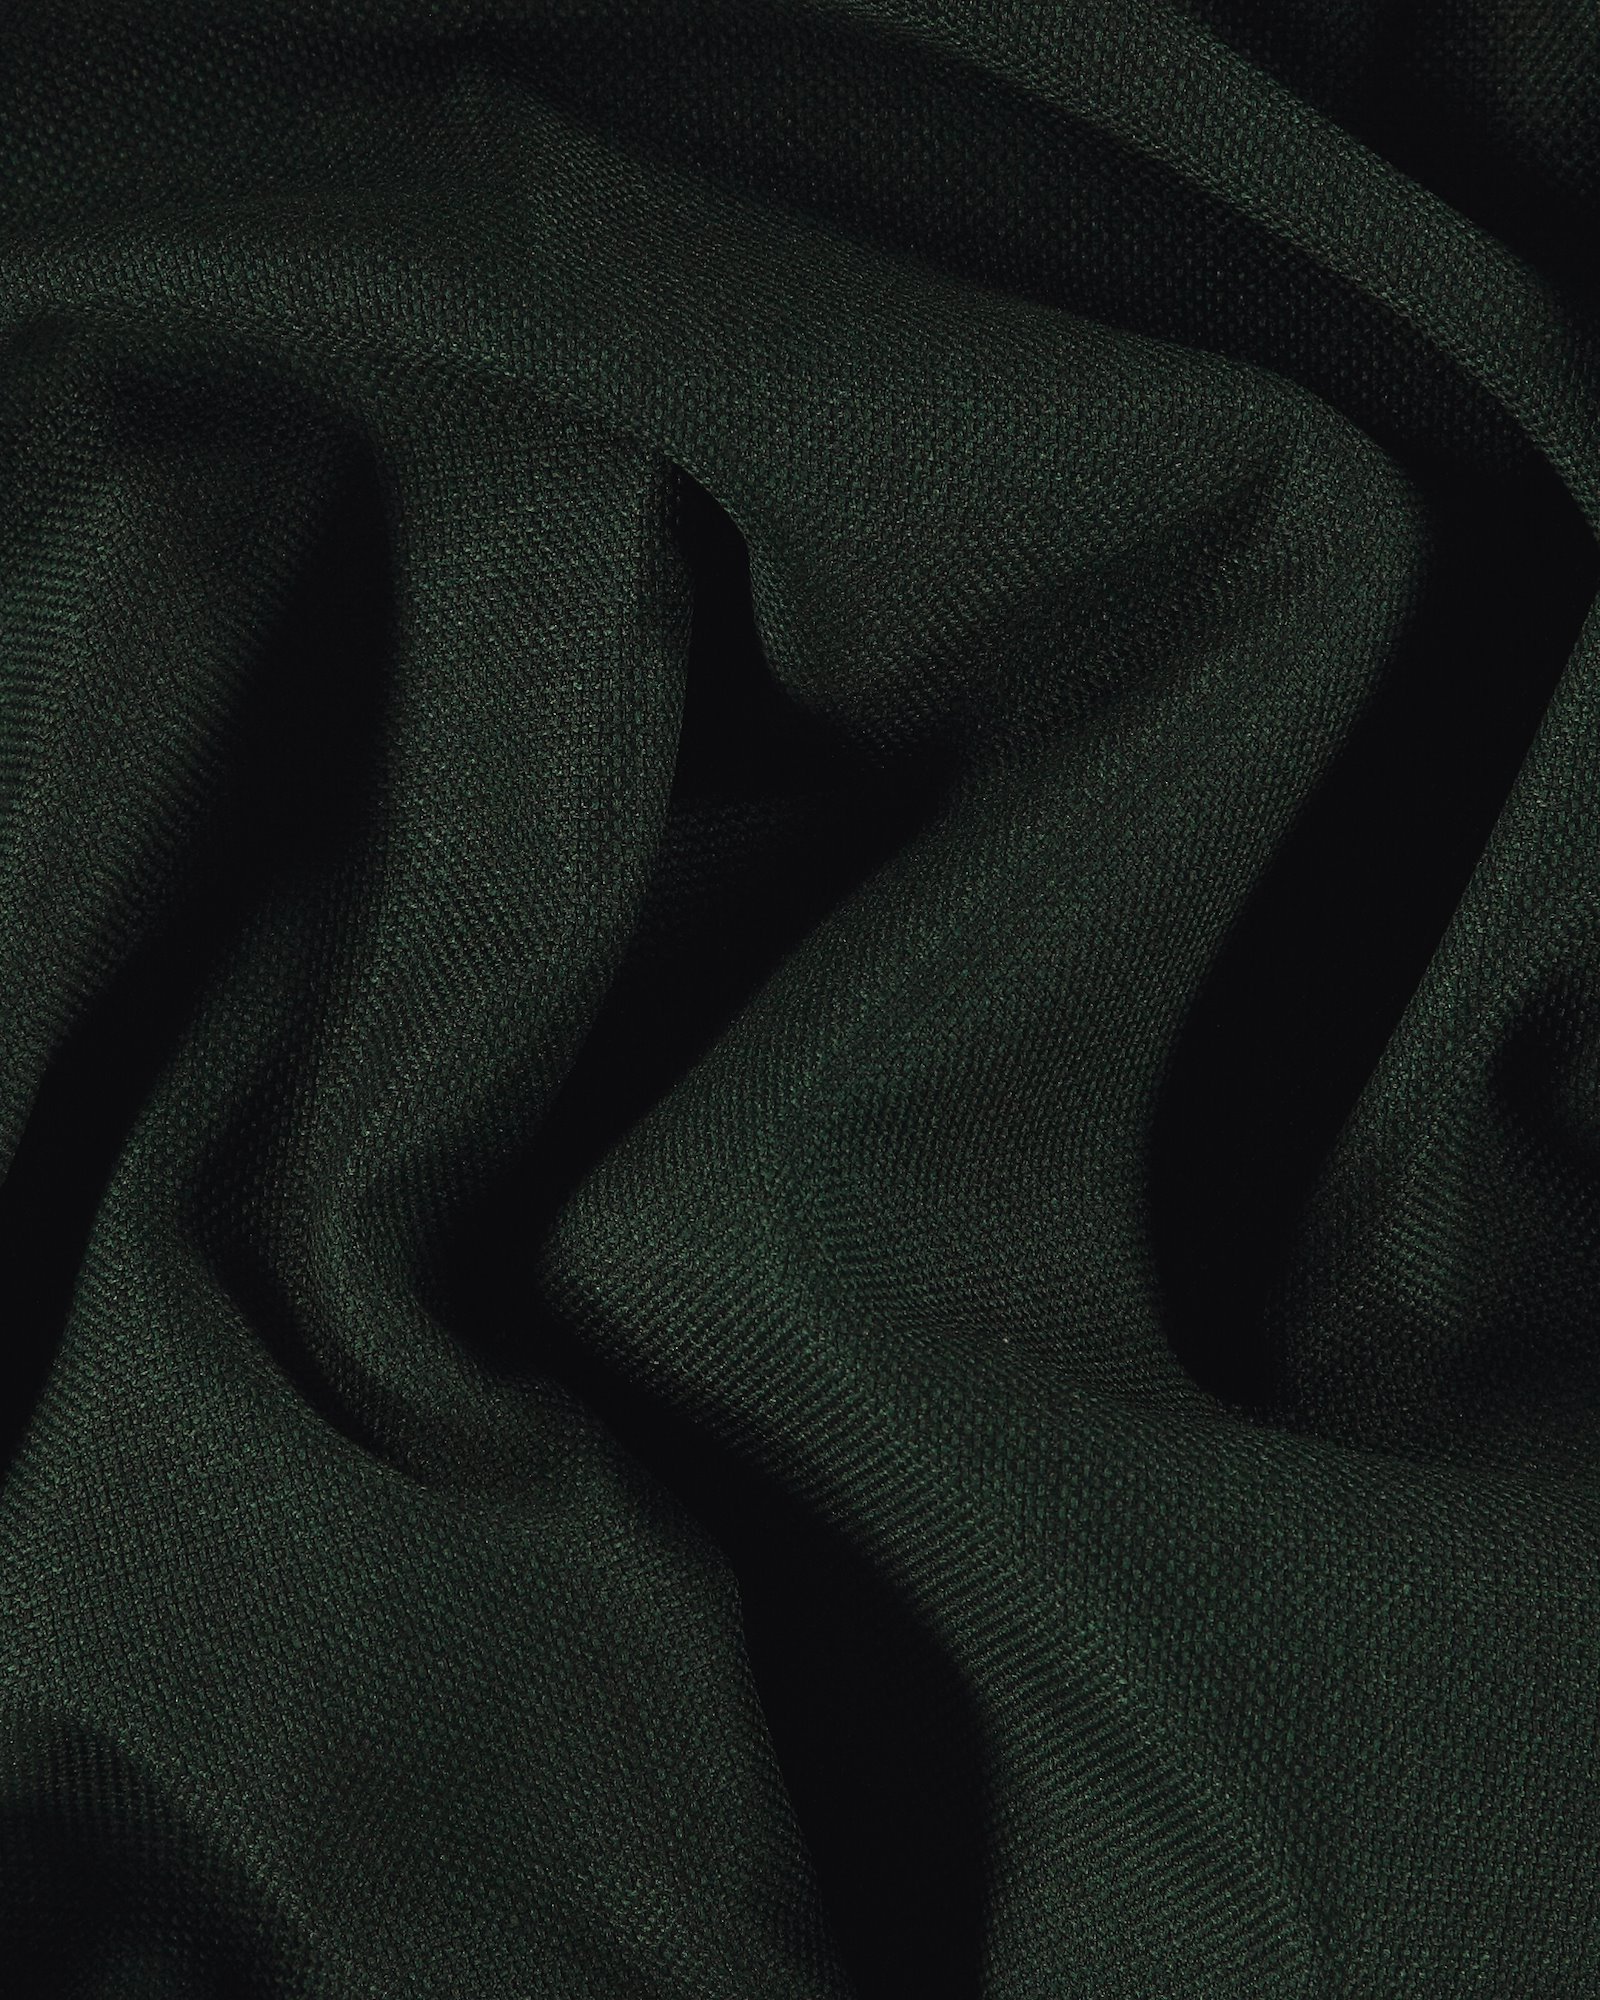 Upholstery fabric emerald green 823696_pack